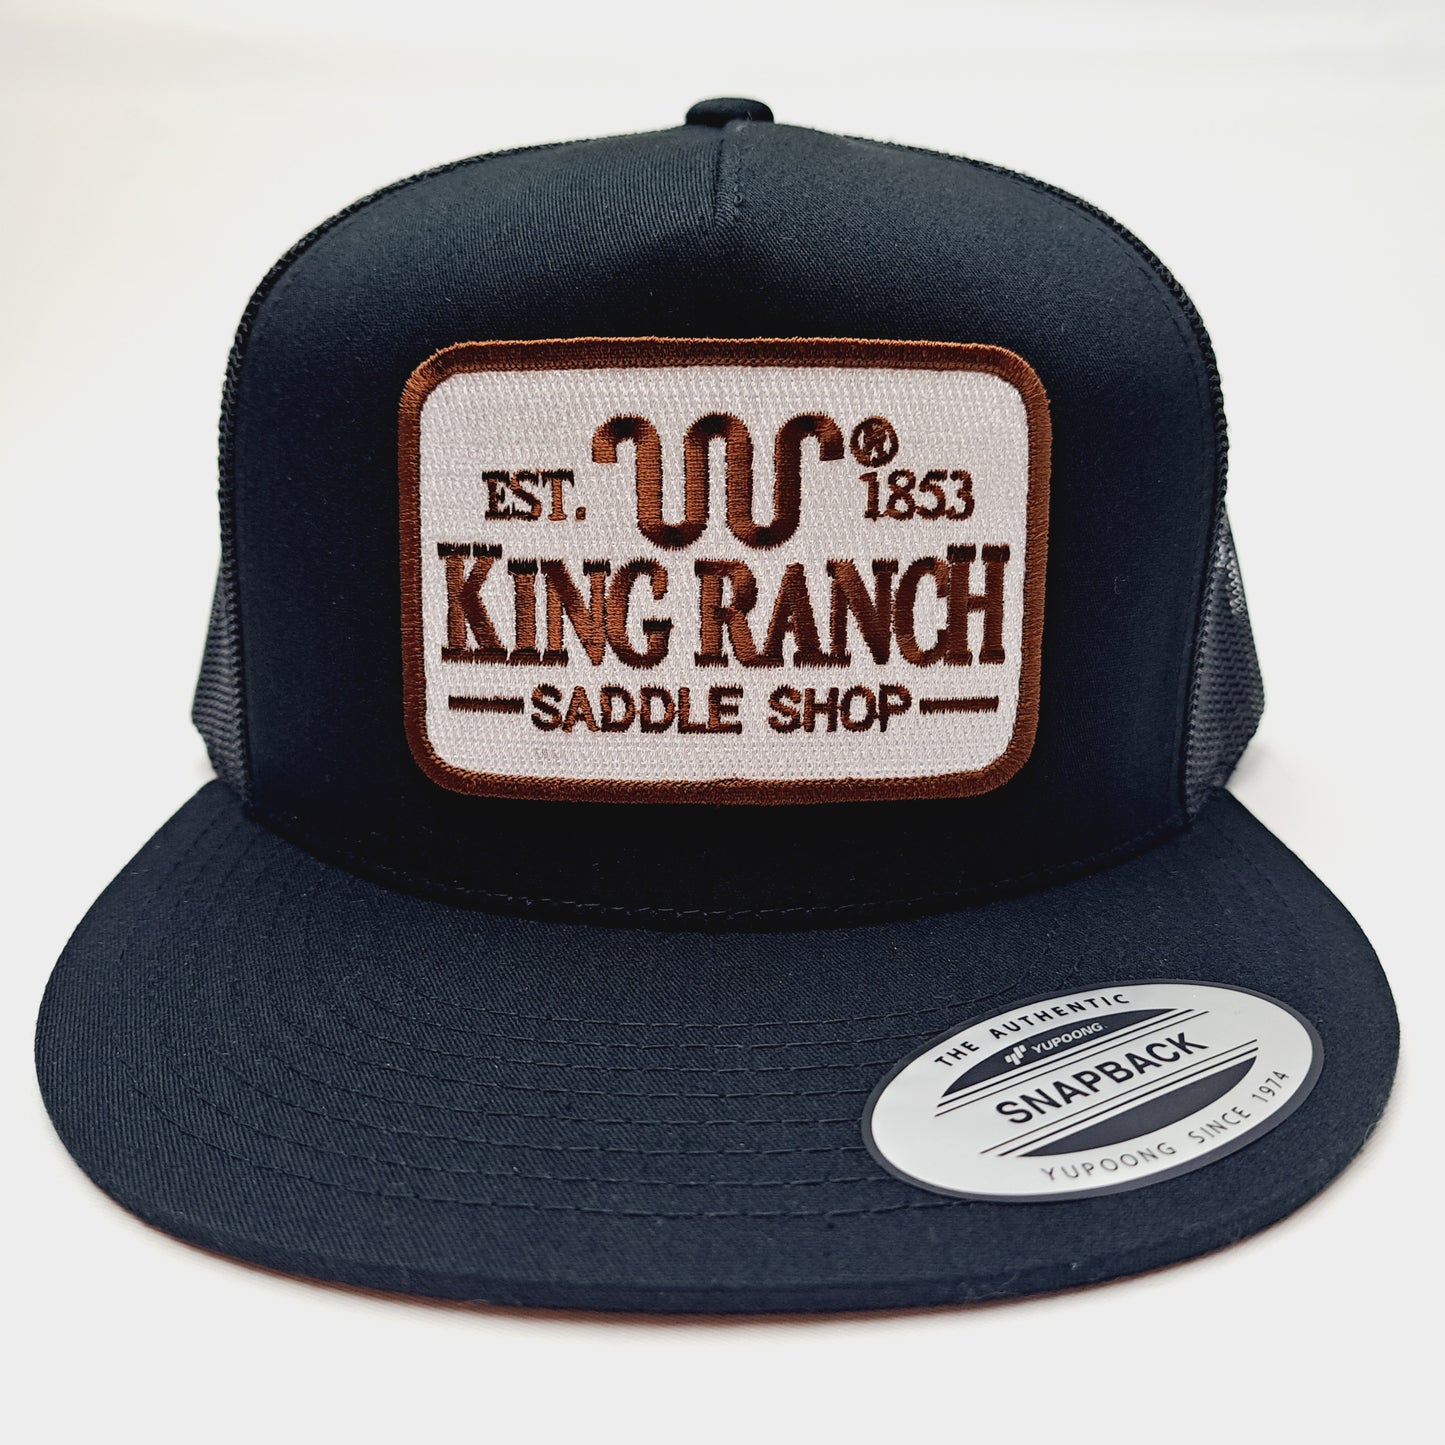 King Ranch Flat Bill Mesh Trucker Snapback Hat Cap Black Embroidered Patch